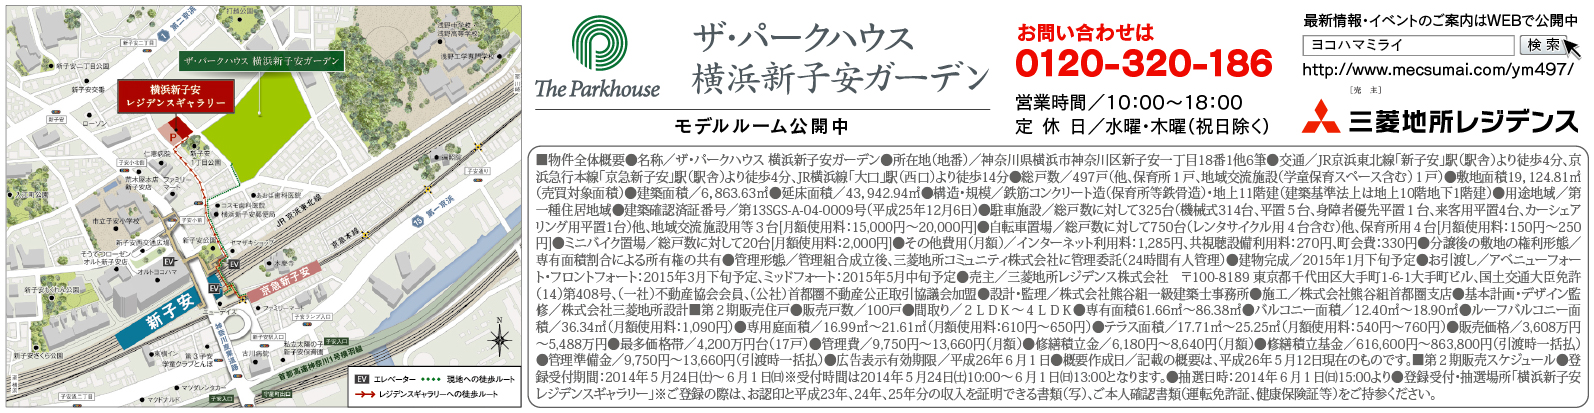 http://www.townnews.co.jp/0117/images/parkhouse_0515.jpg